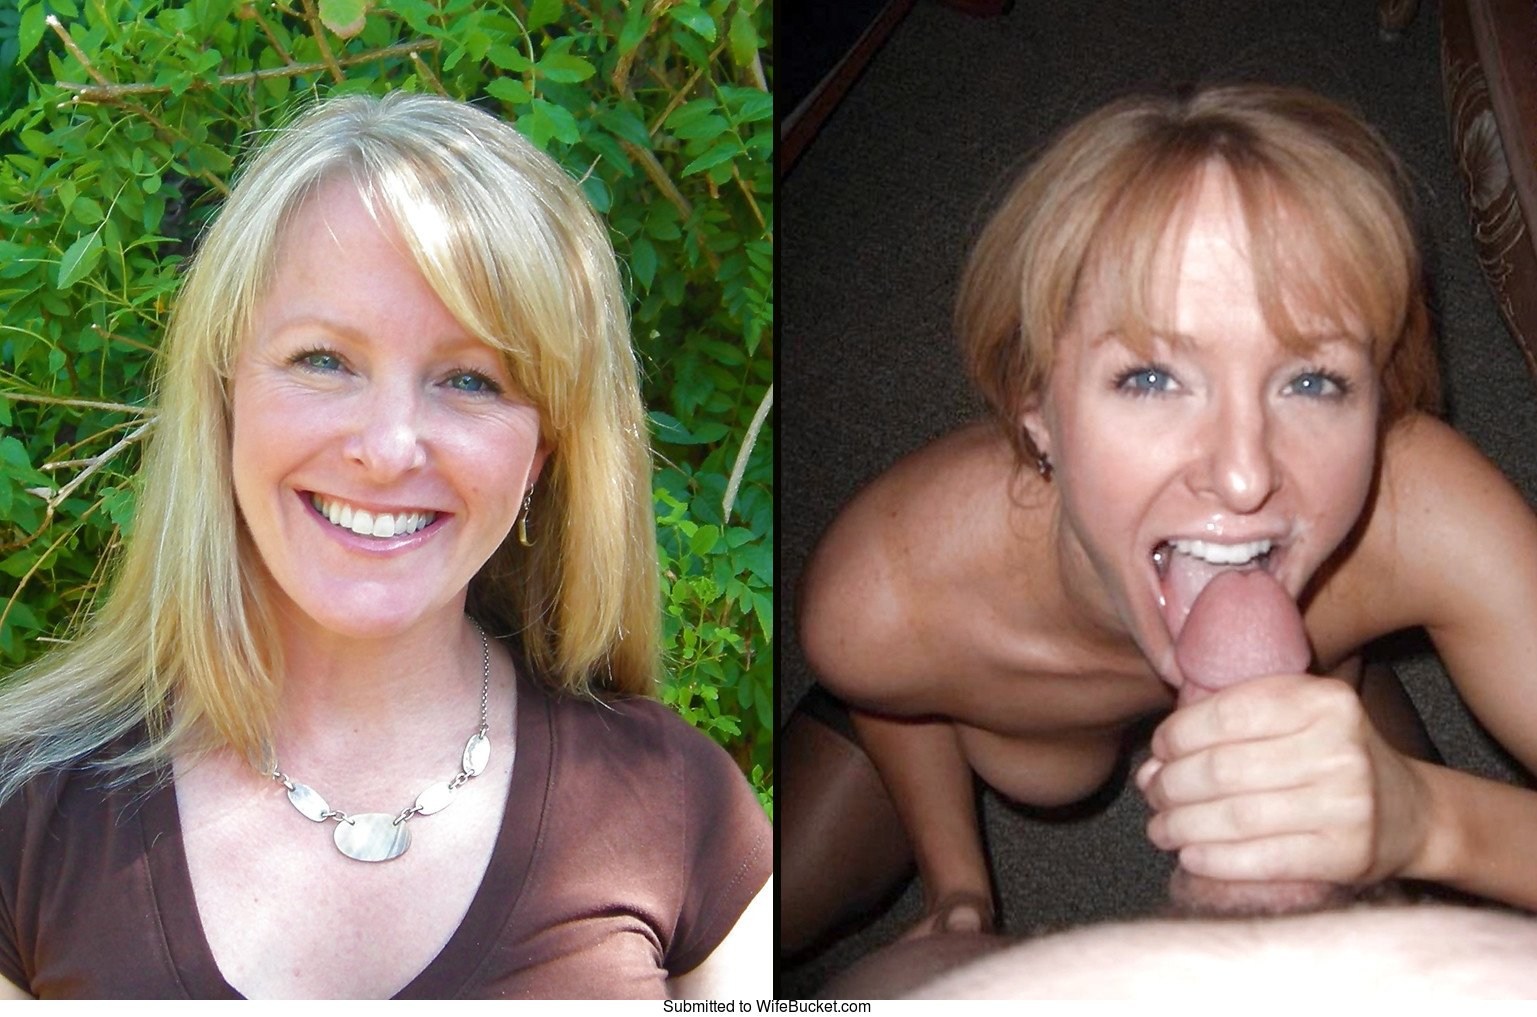 Sex Mature Women Before and After (63 photos)